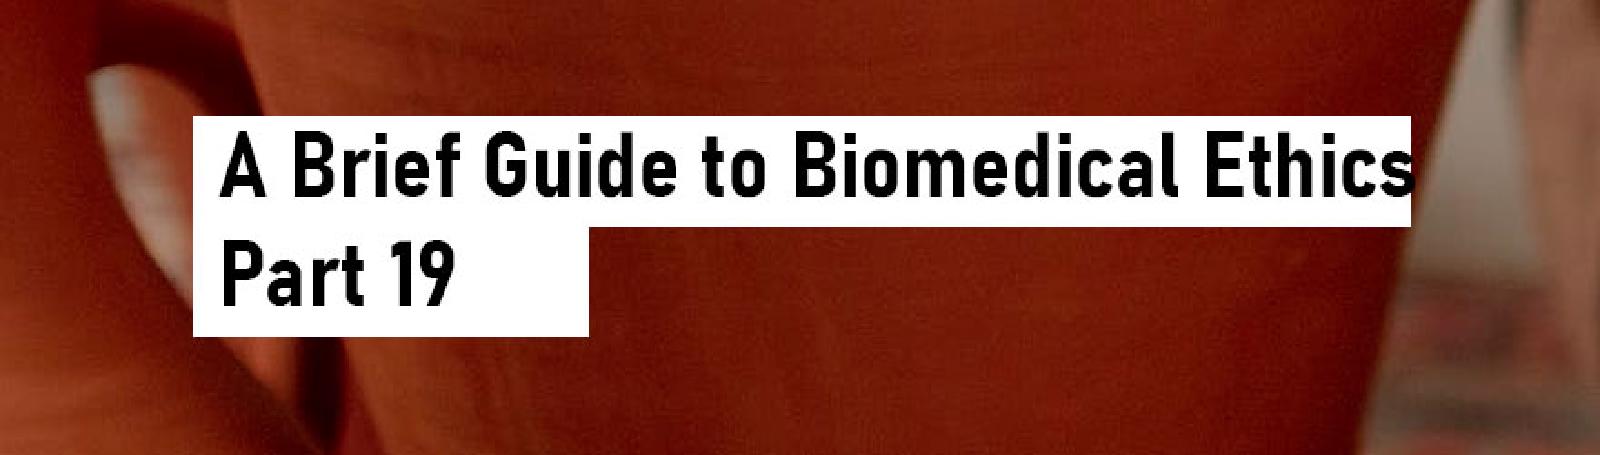 A Brief Guide To Biomedical Ethics Part